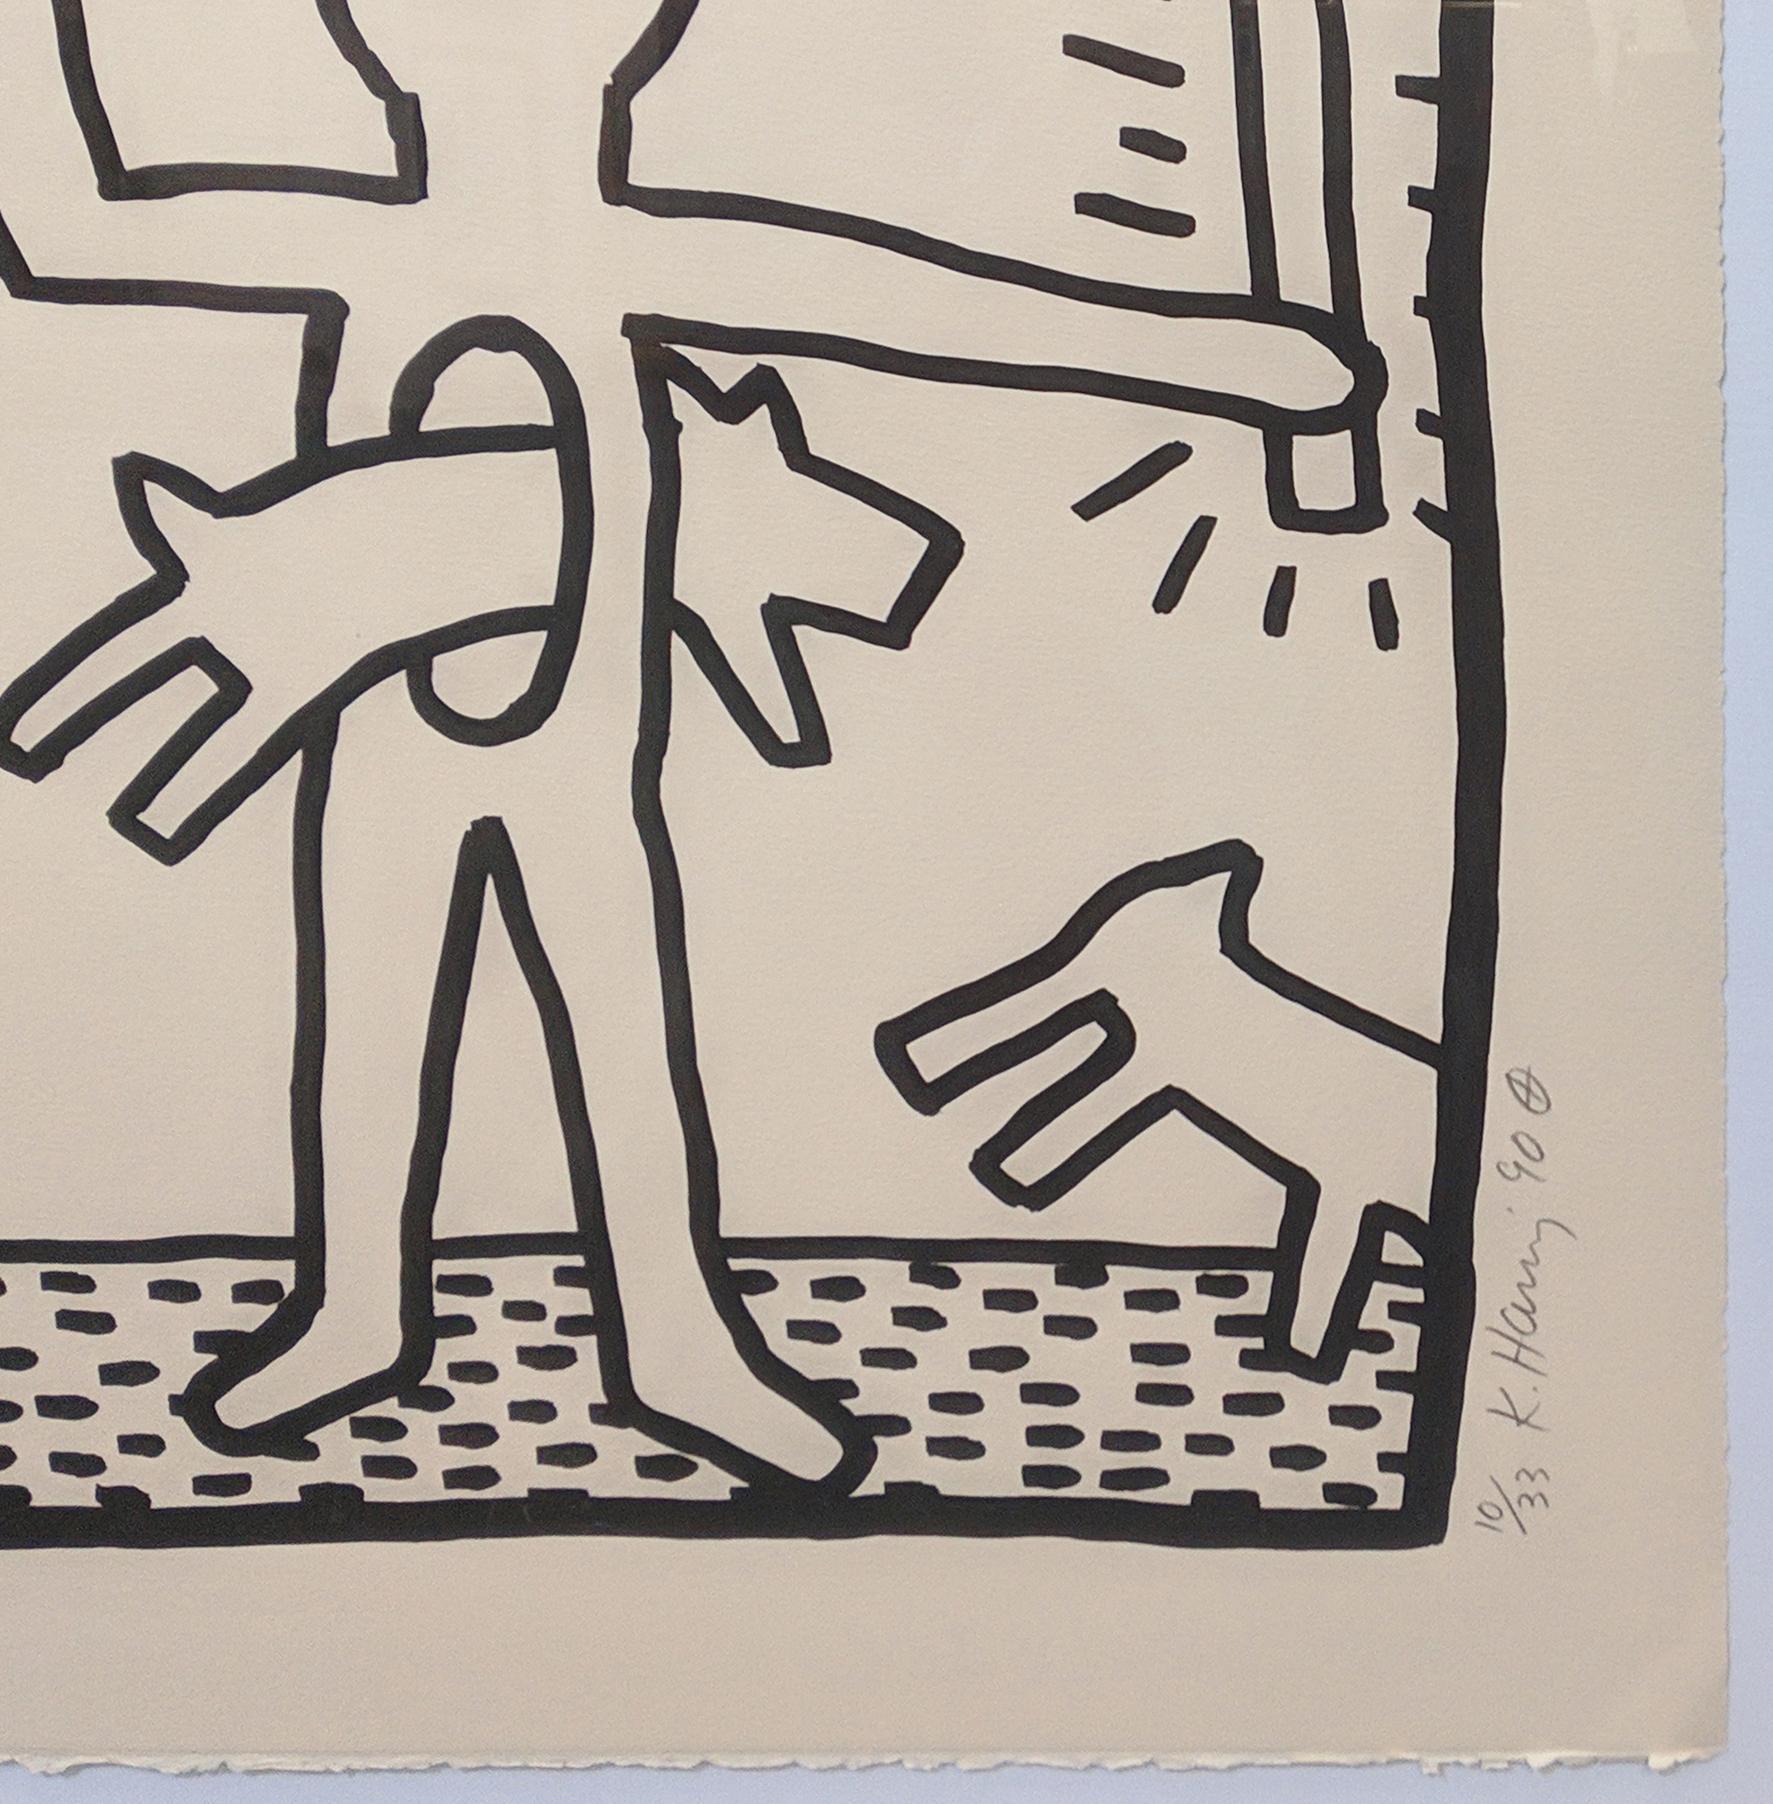 UNTITLED (FROM BLUEPRINT DRAWINGS) - Print by Keith Haring